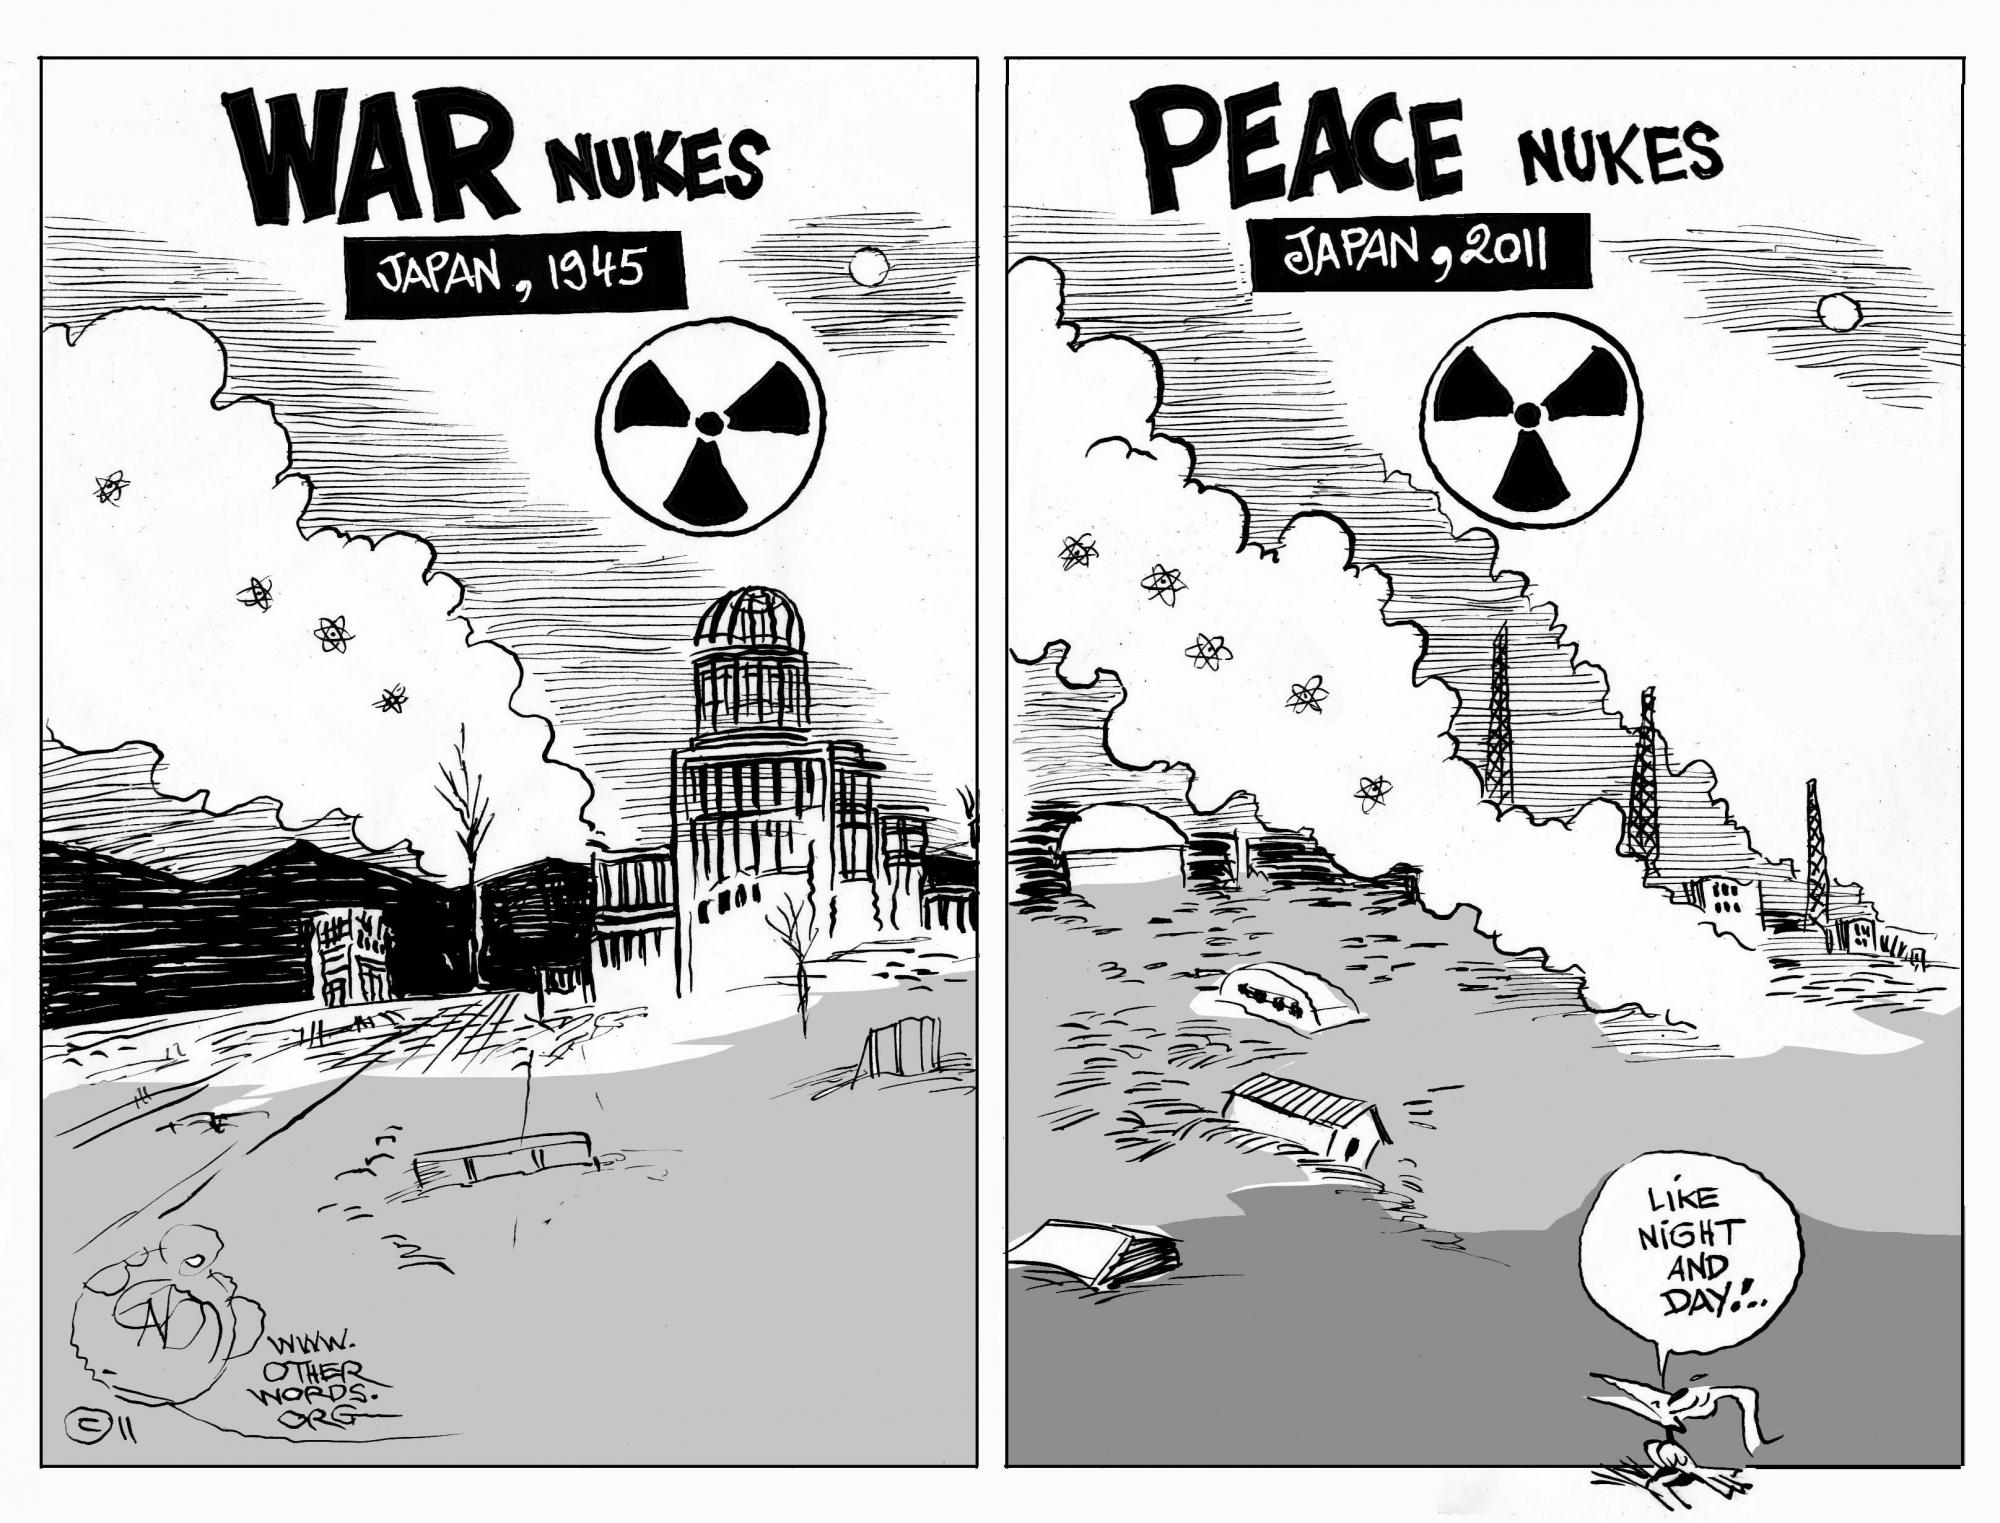 Nuclear War and Peace